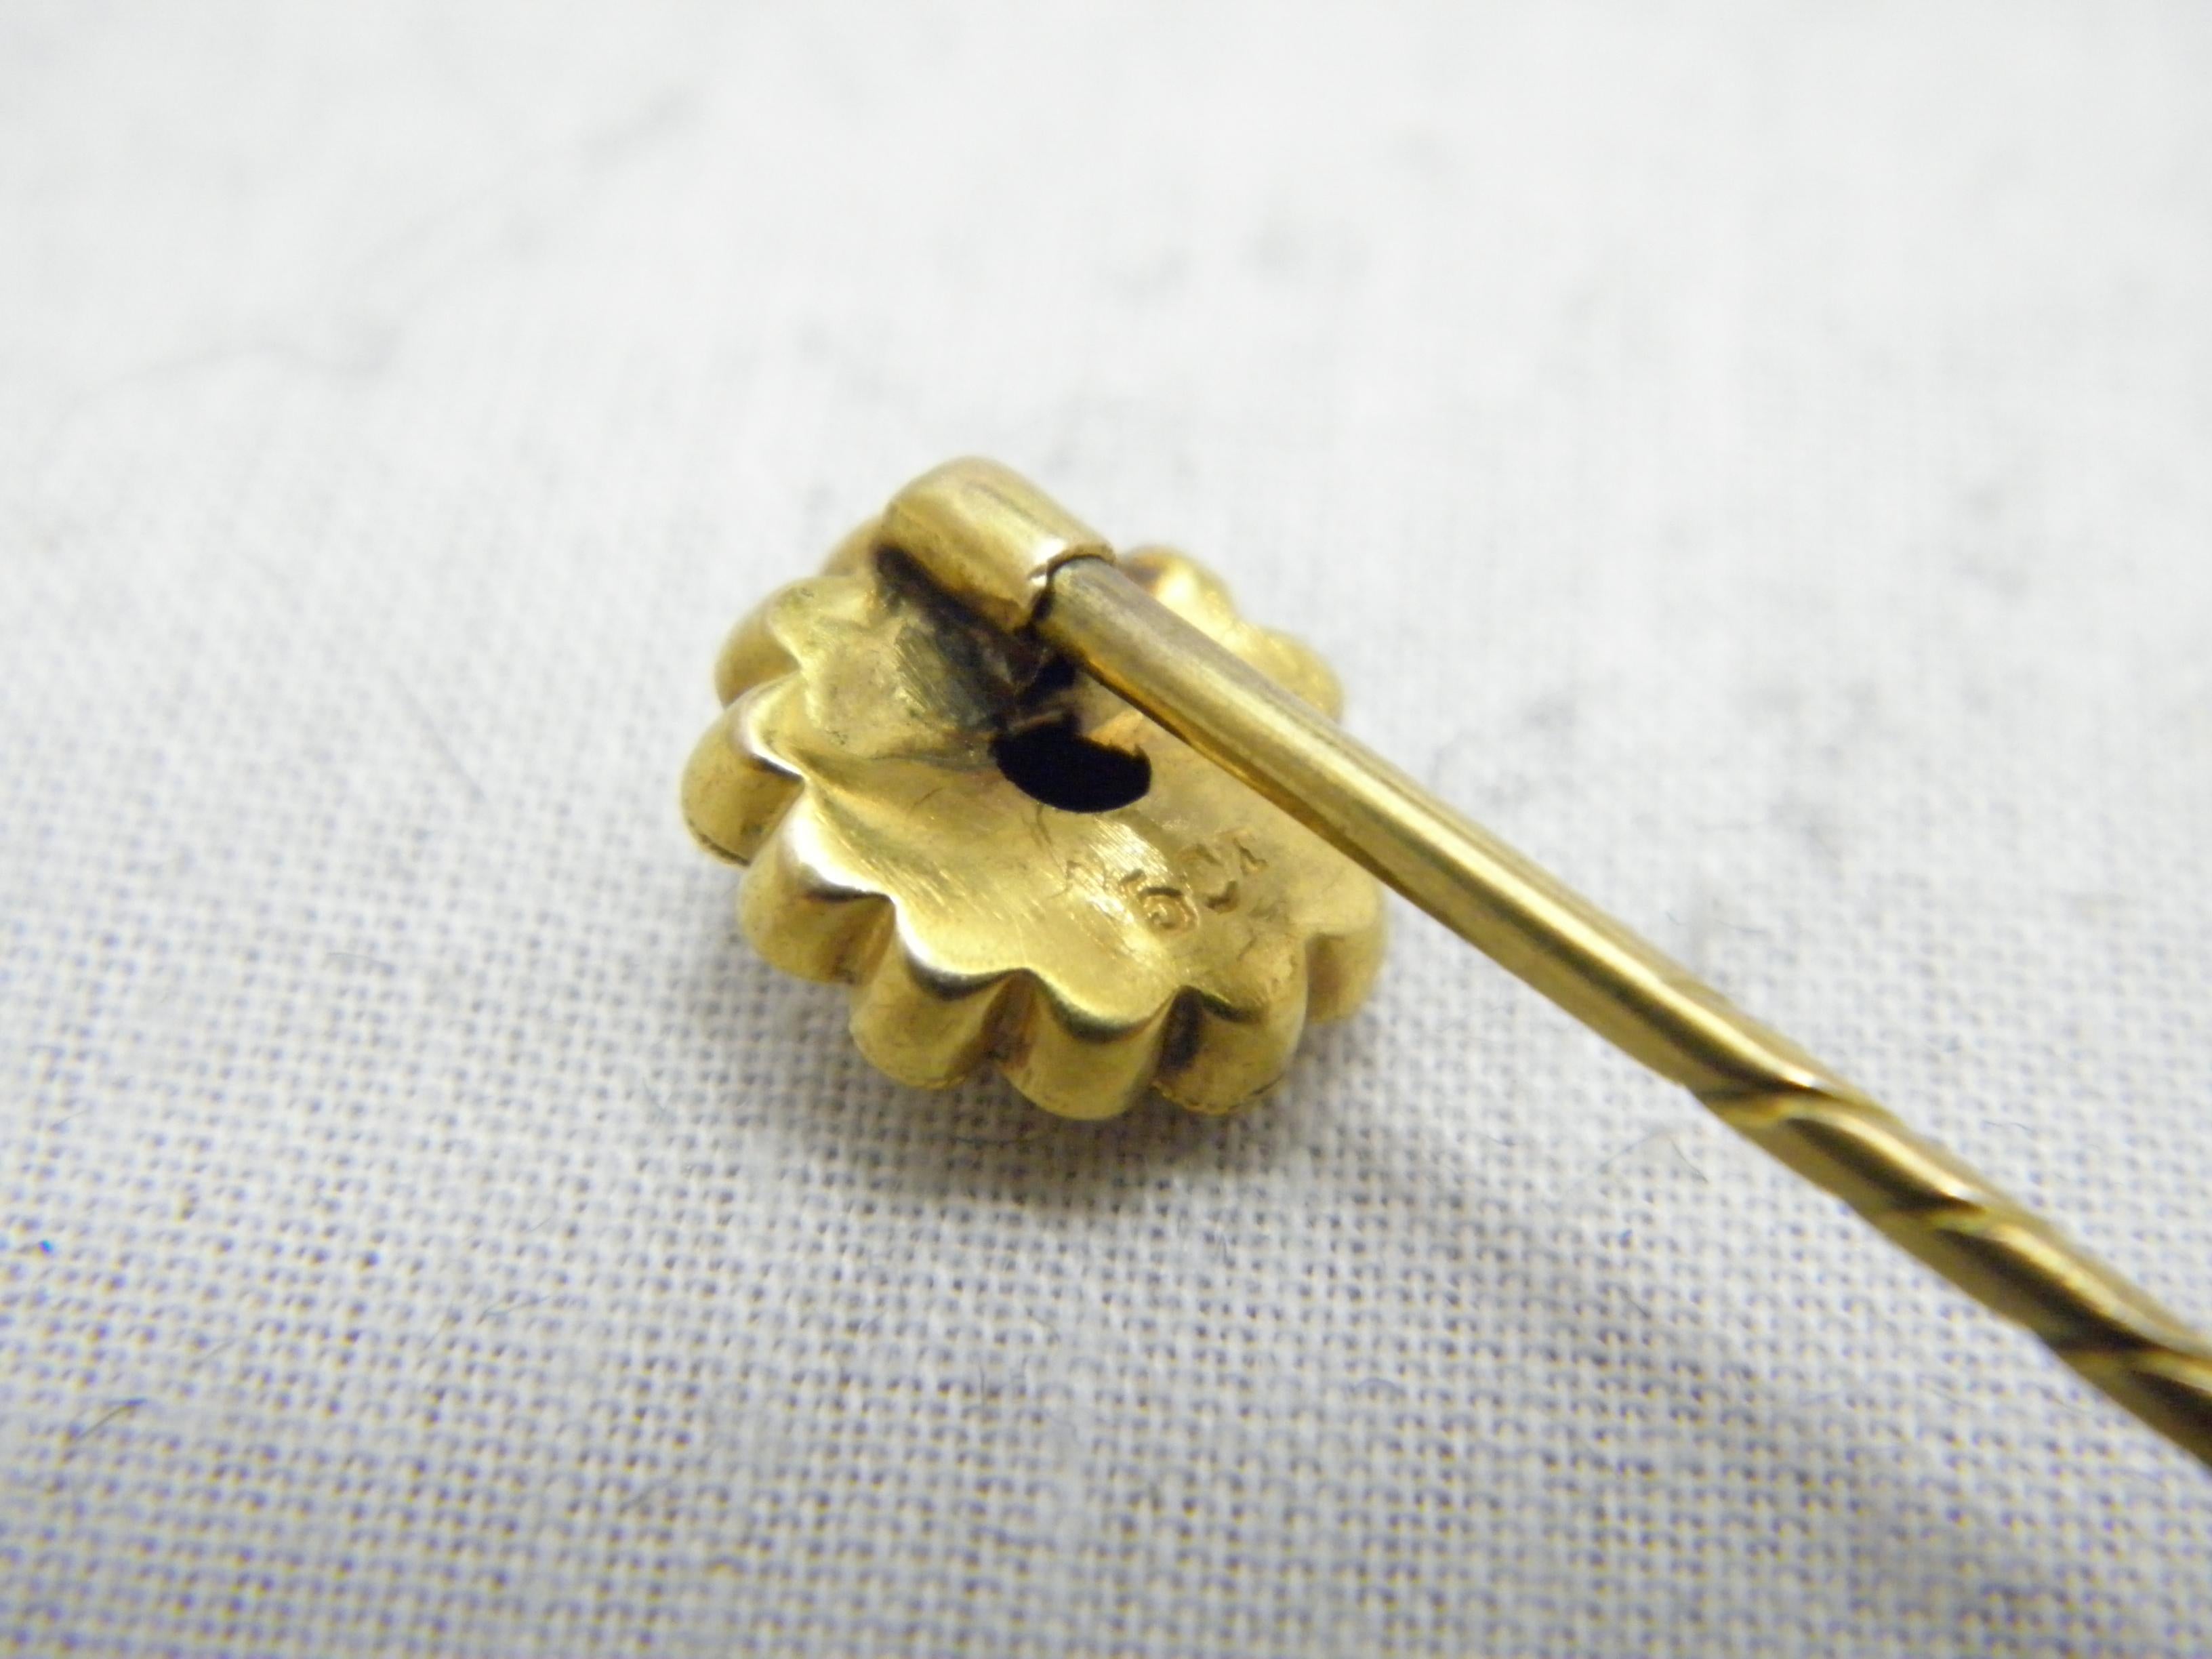 Antique 15ct Gold Diamond Stock Pin Brooch c1880 Heavy 625 Purity Tie Lapel Hat For Sale 3